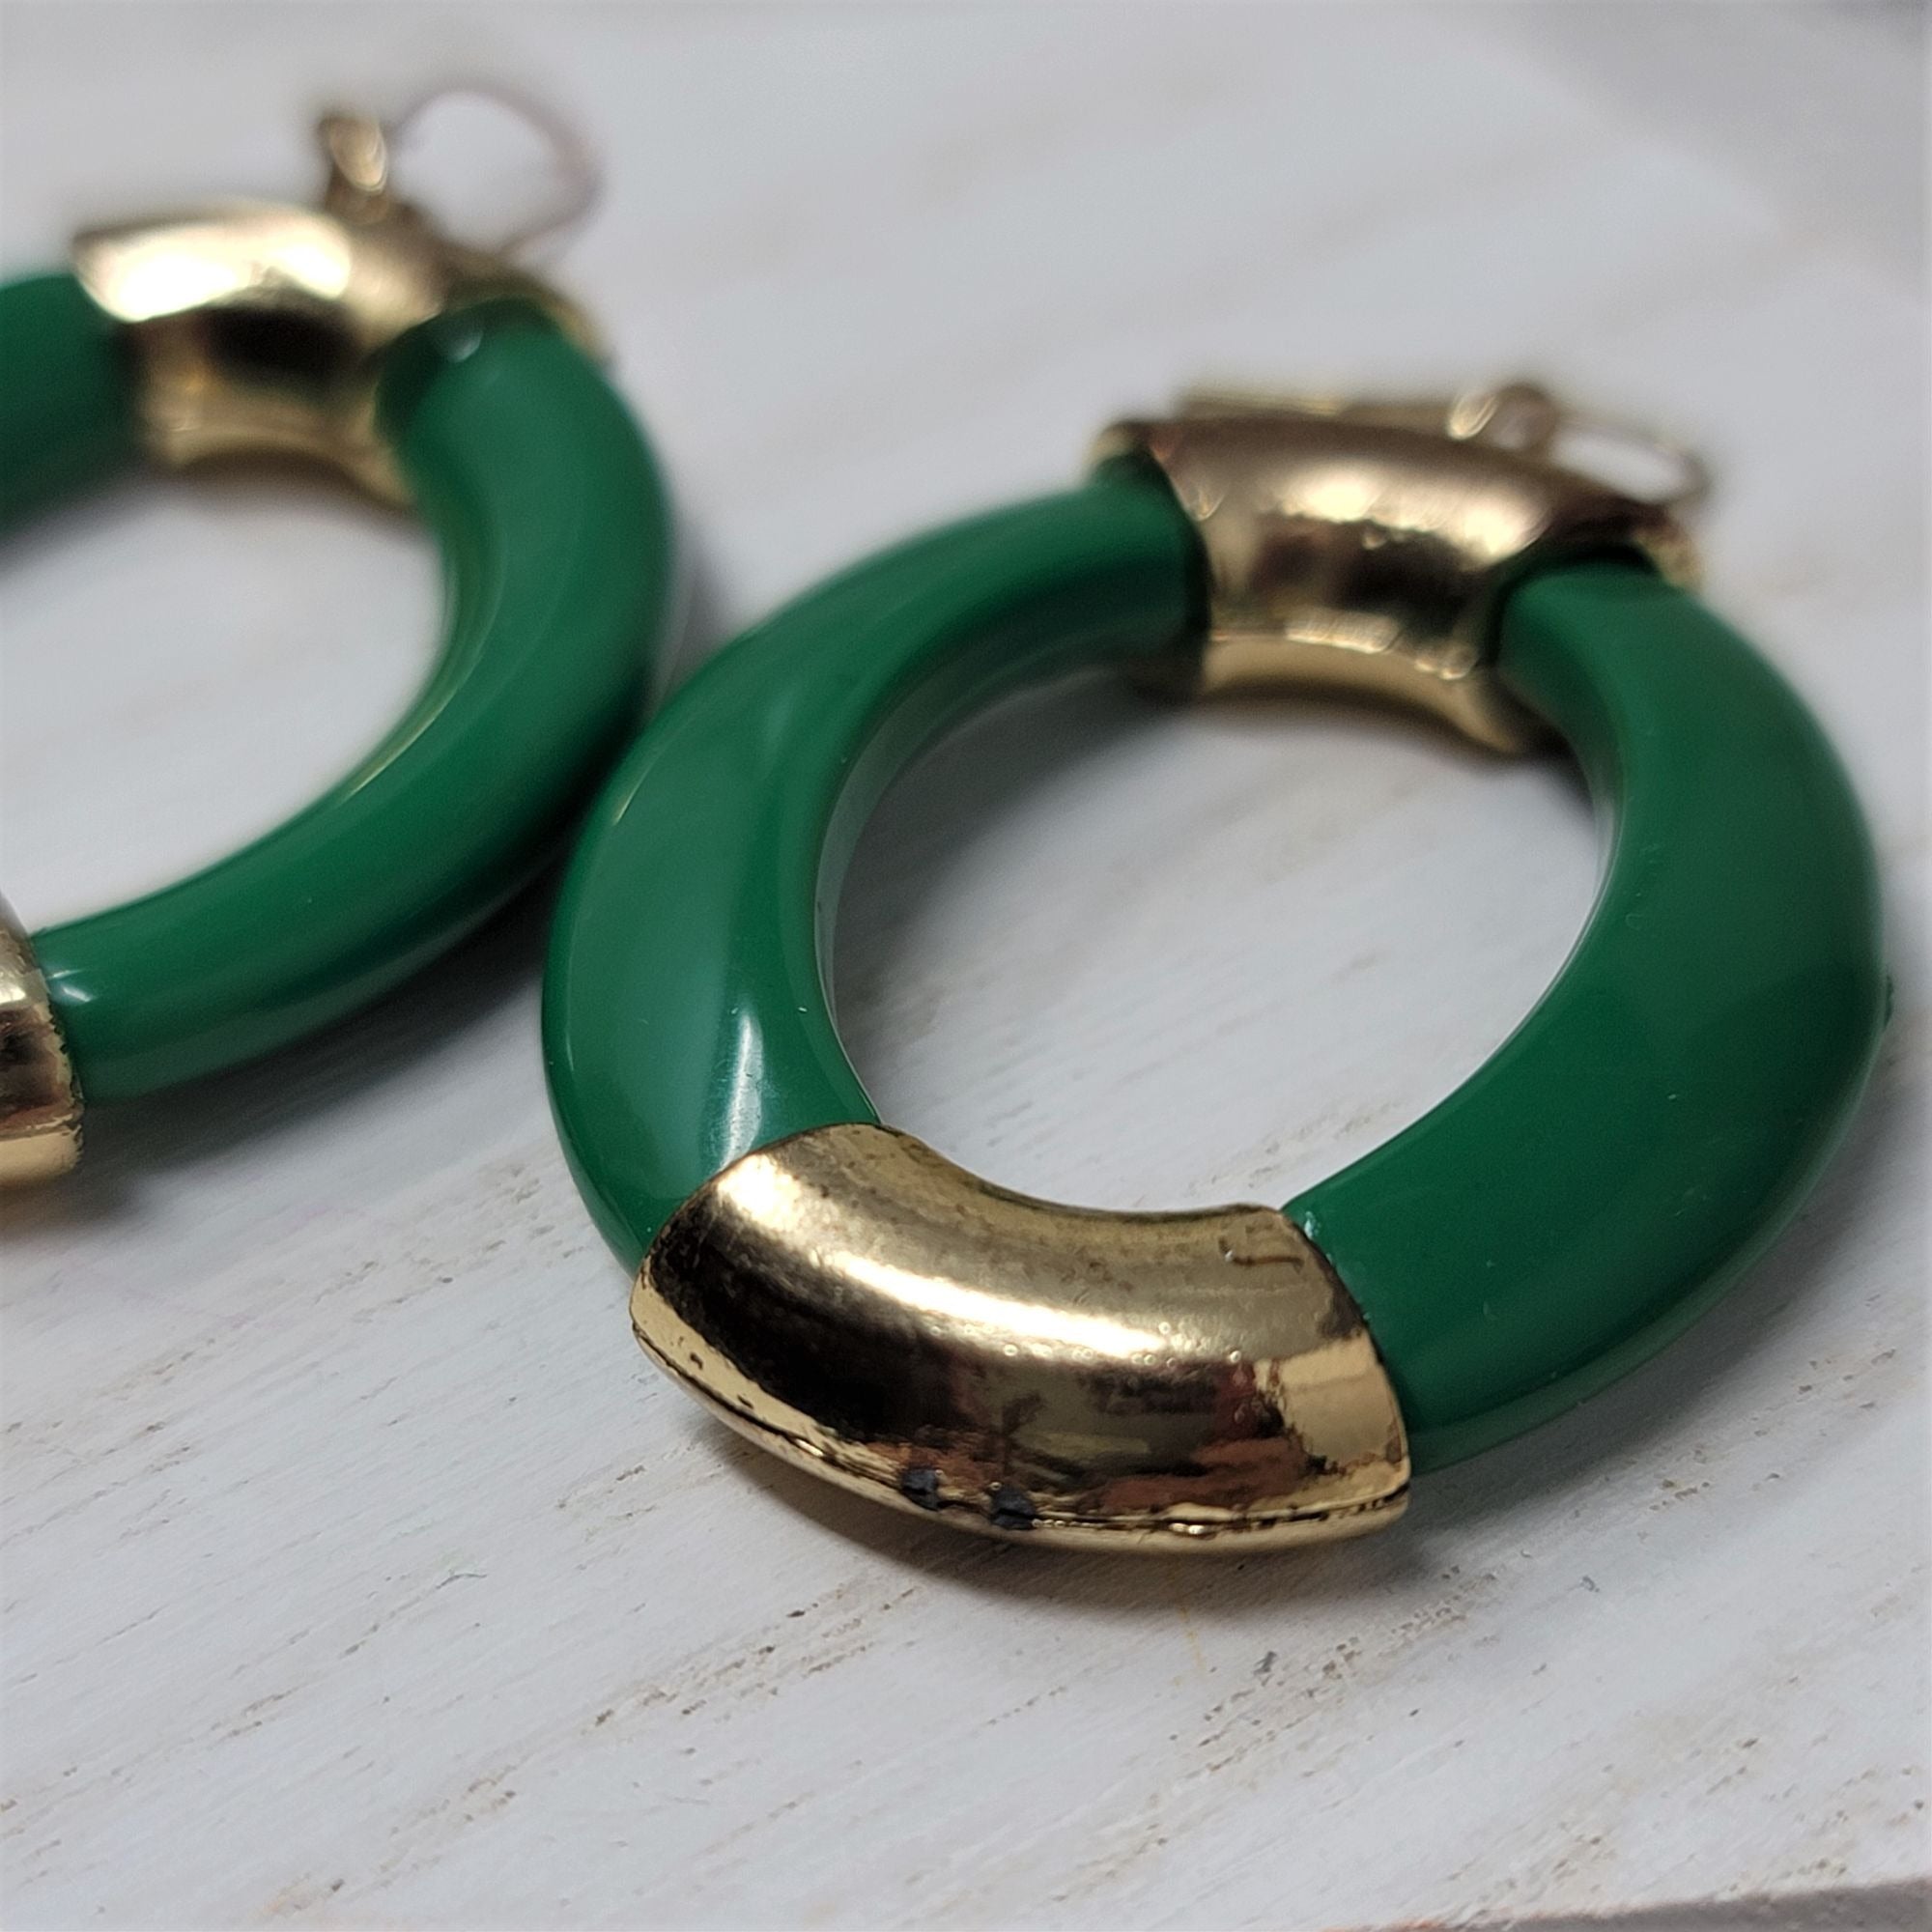 Awesome Large Green & Gold Earrings Pierced Wires